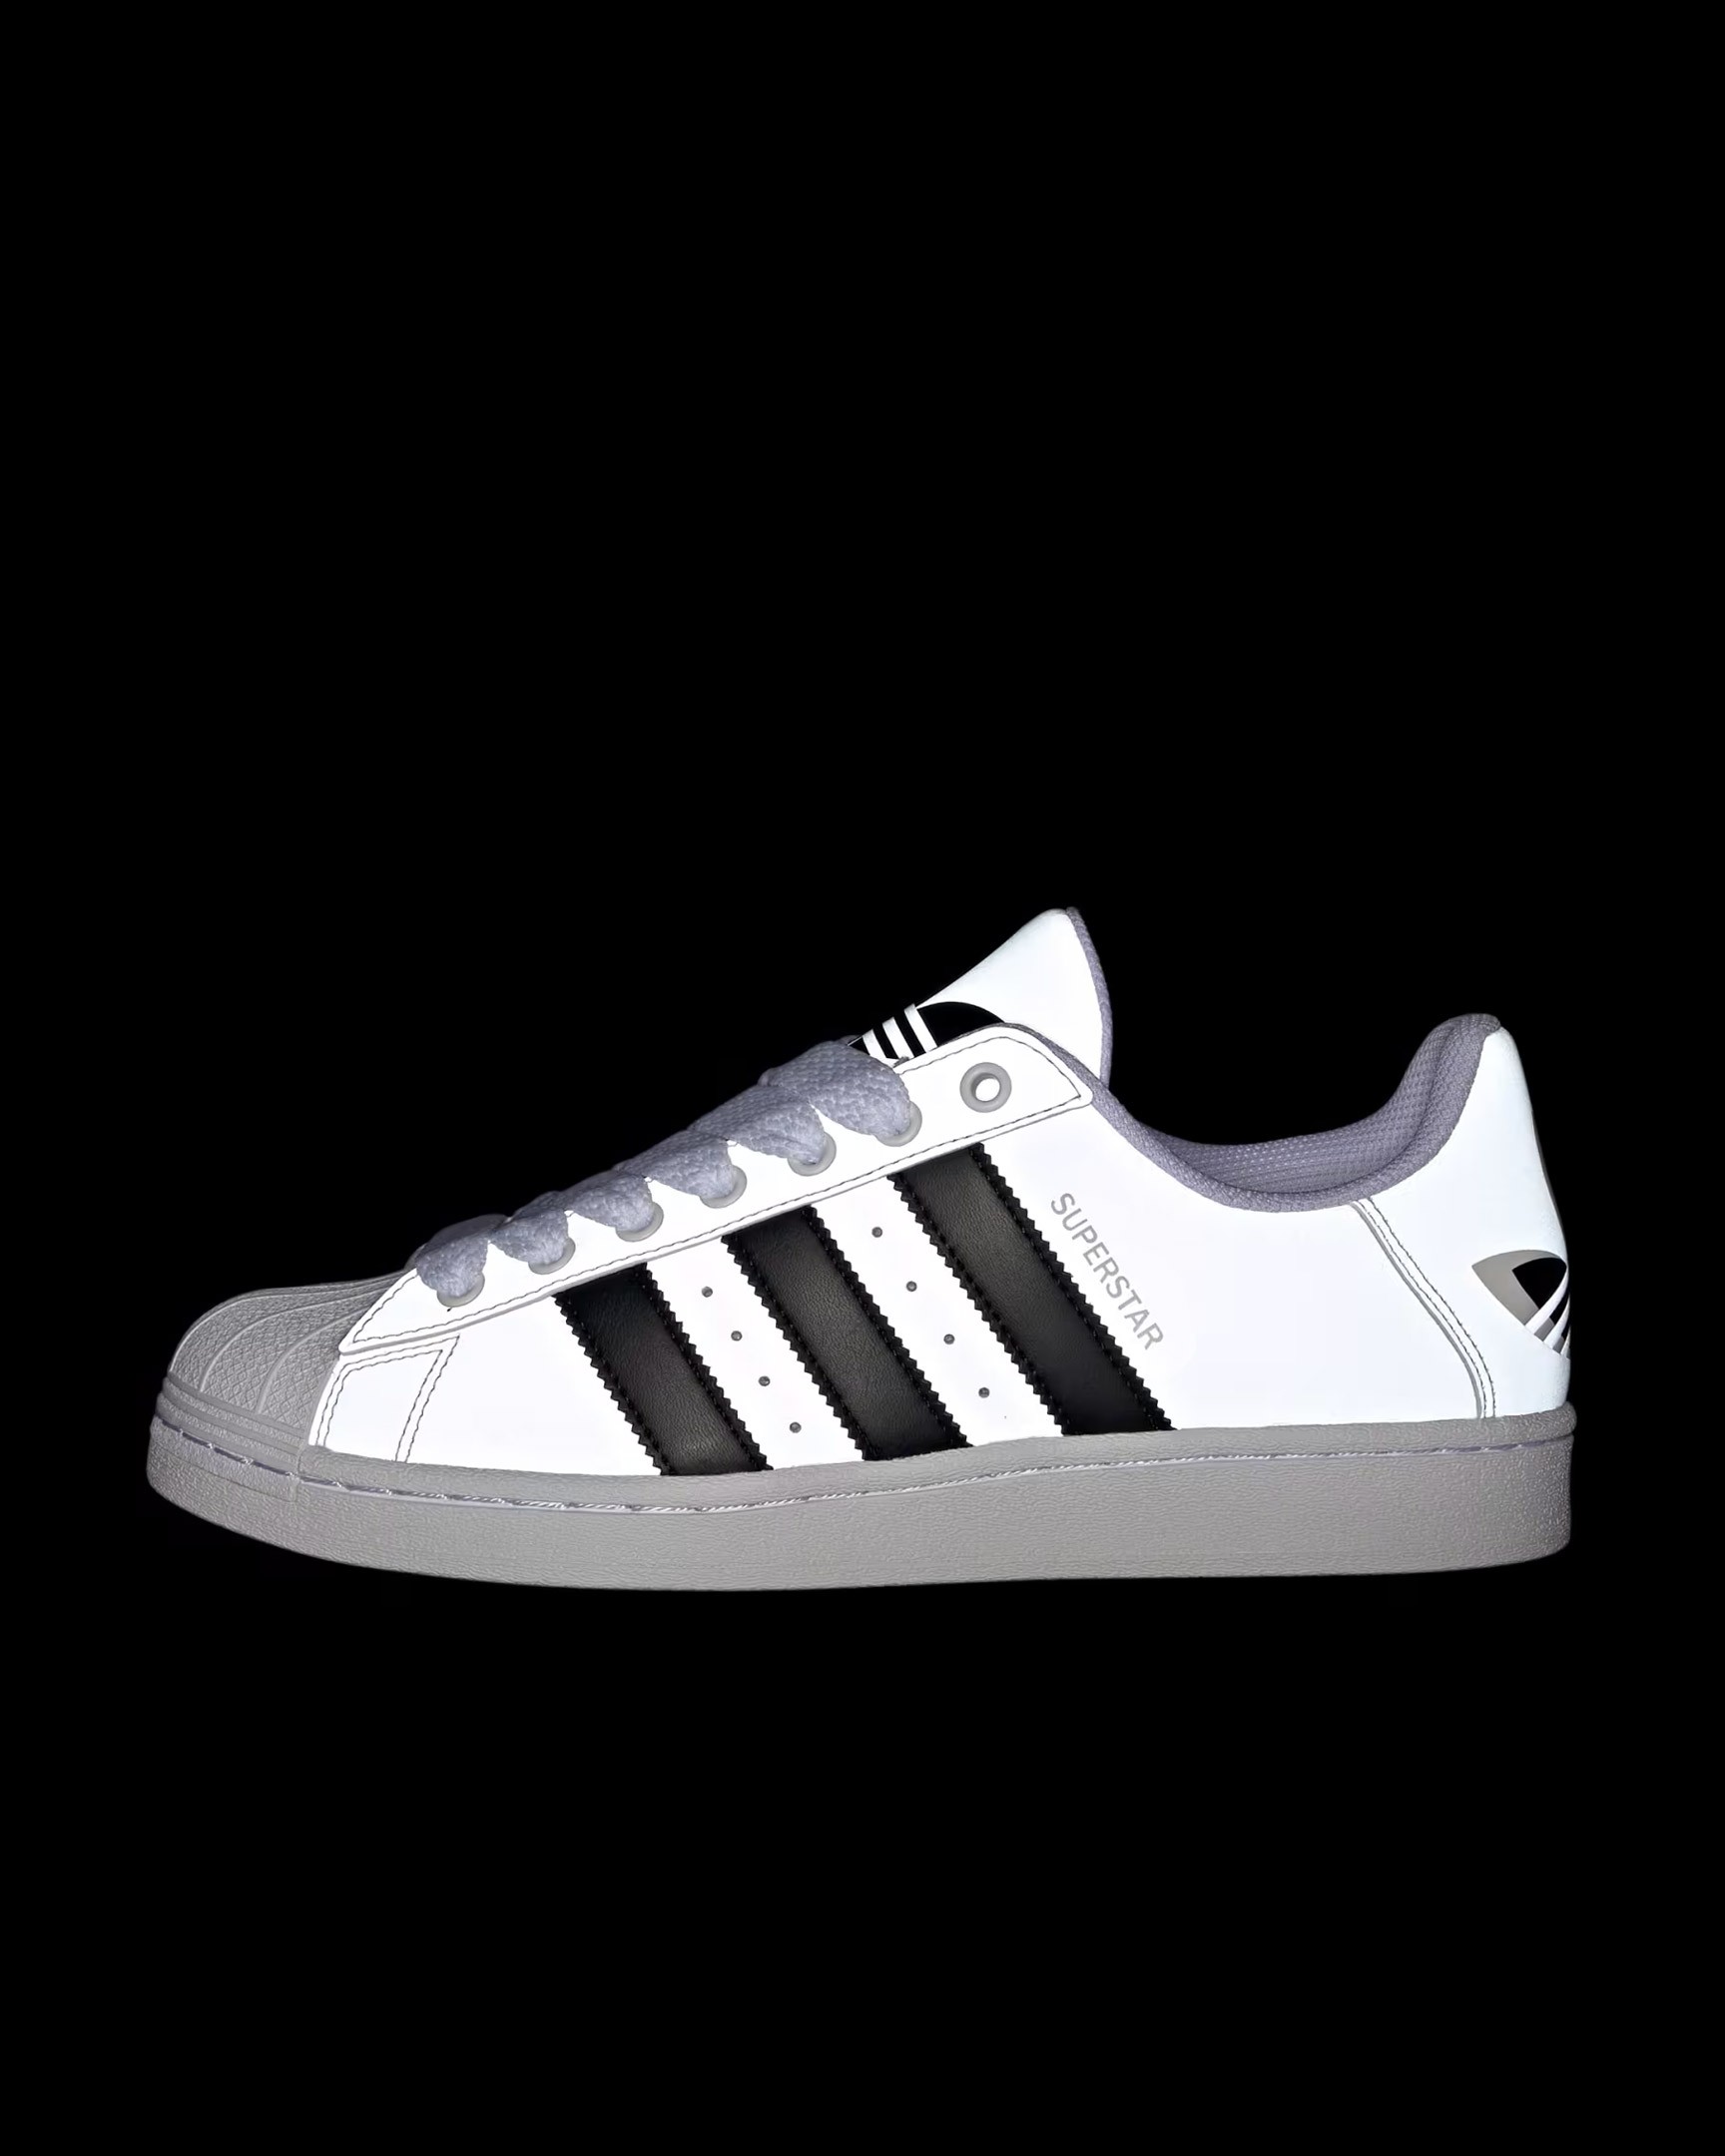 SUPERSTAR CORE WHITE REFLECTIVE PACK